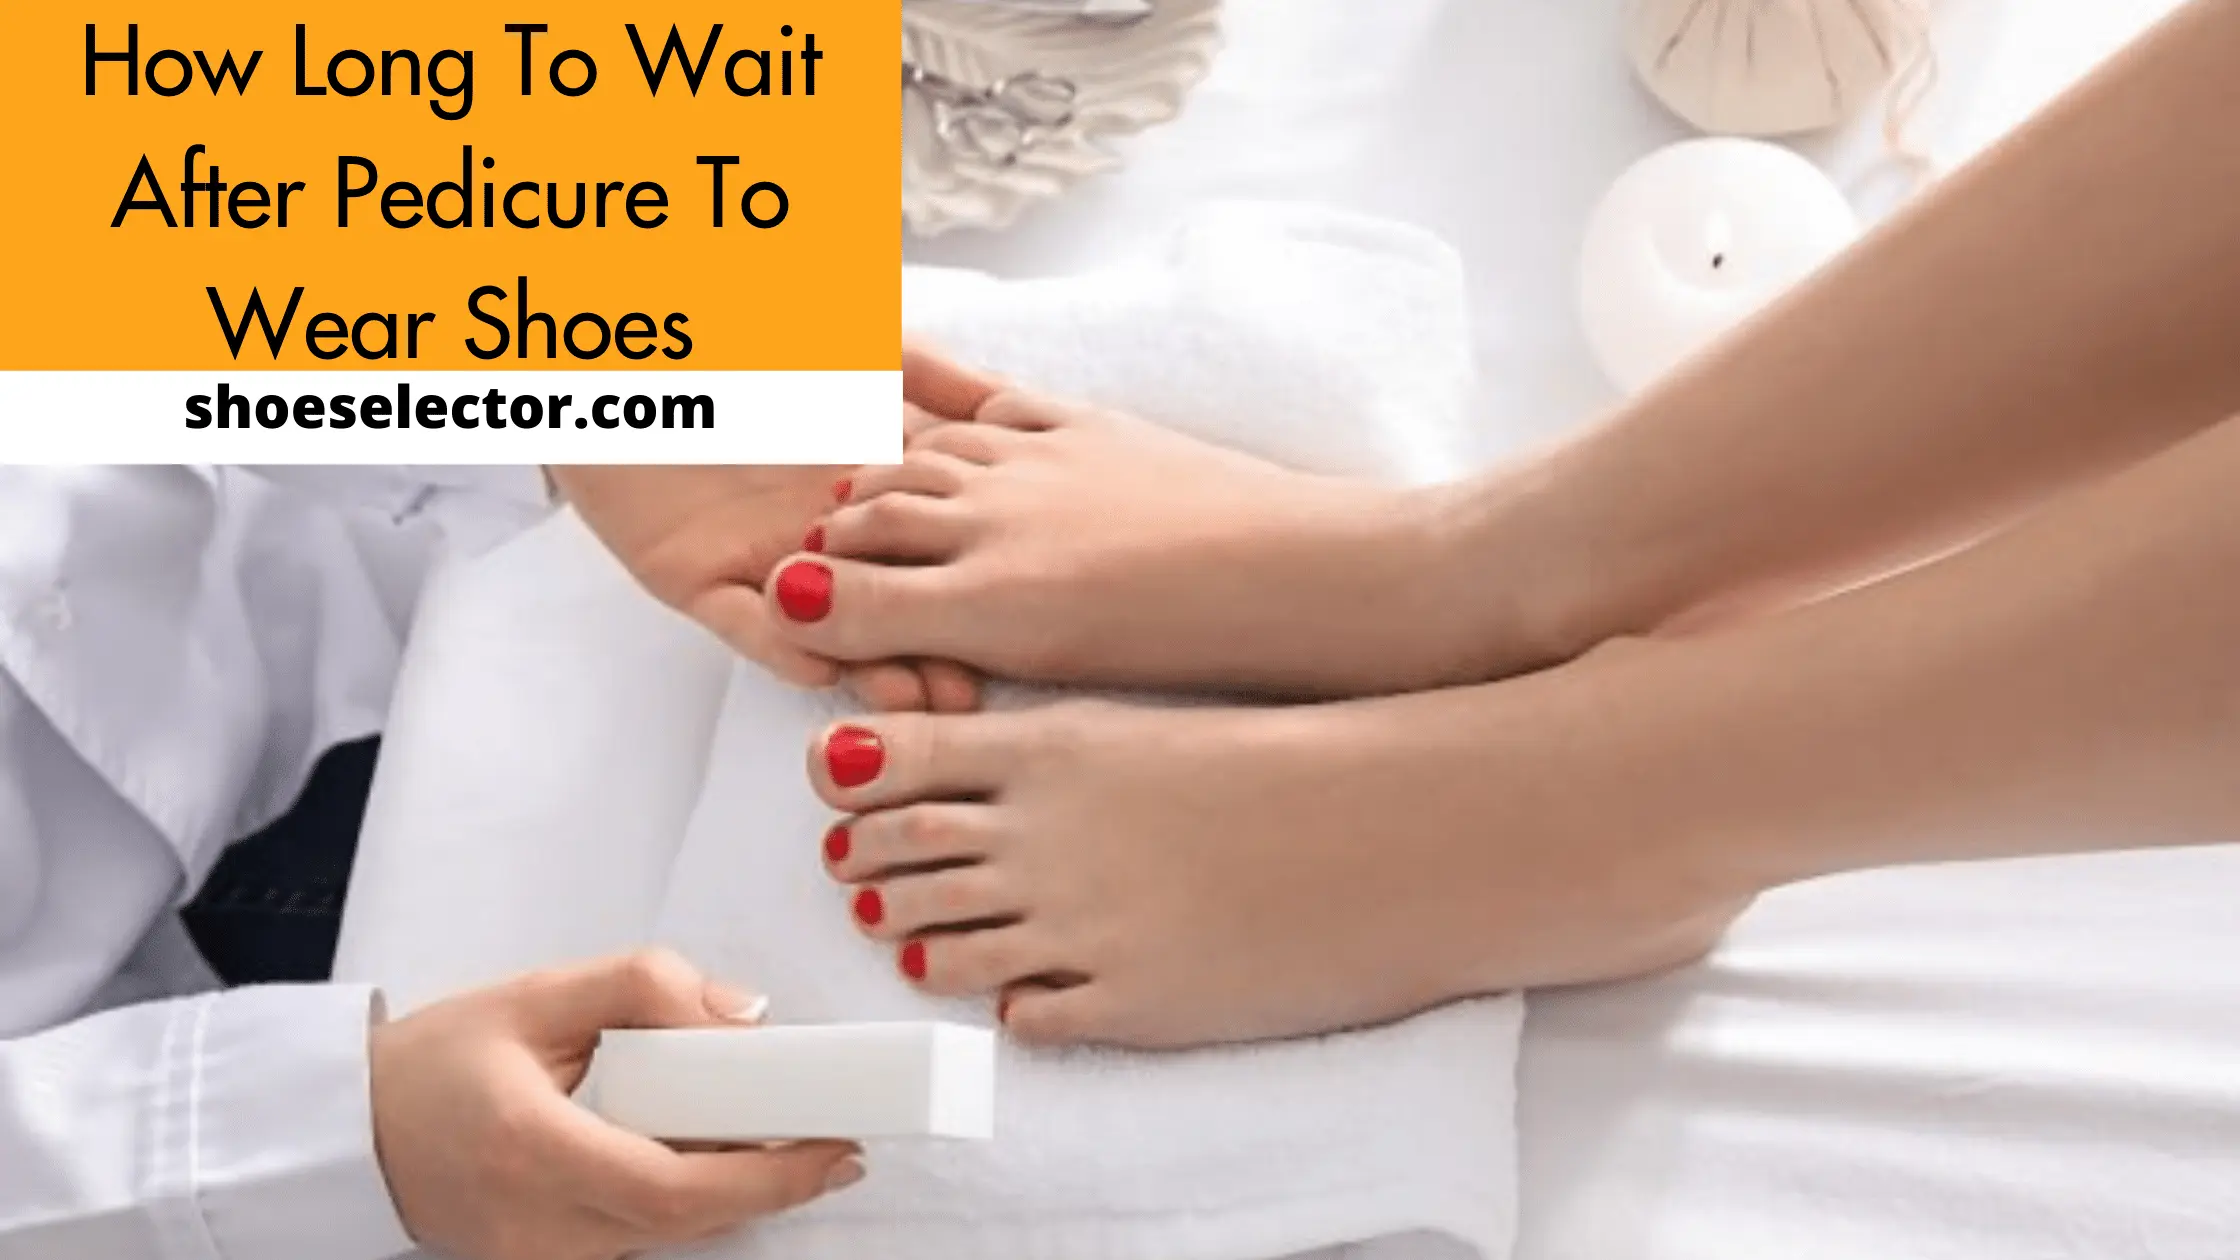 How Long To Wait After Pedicure To Wear Shoes? Easy Guide